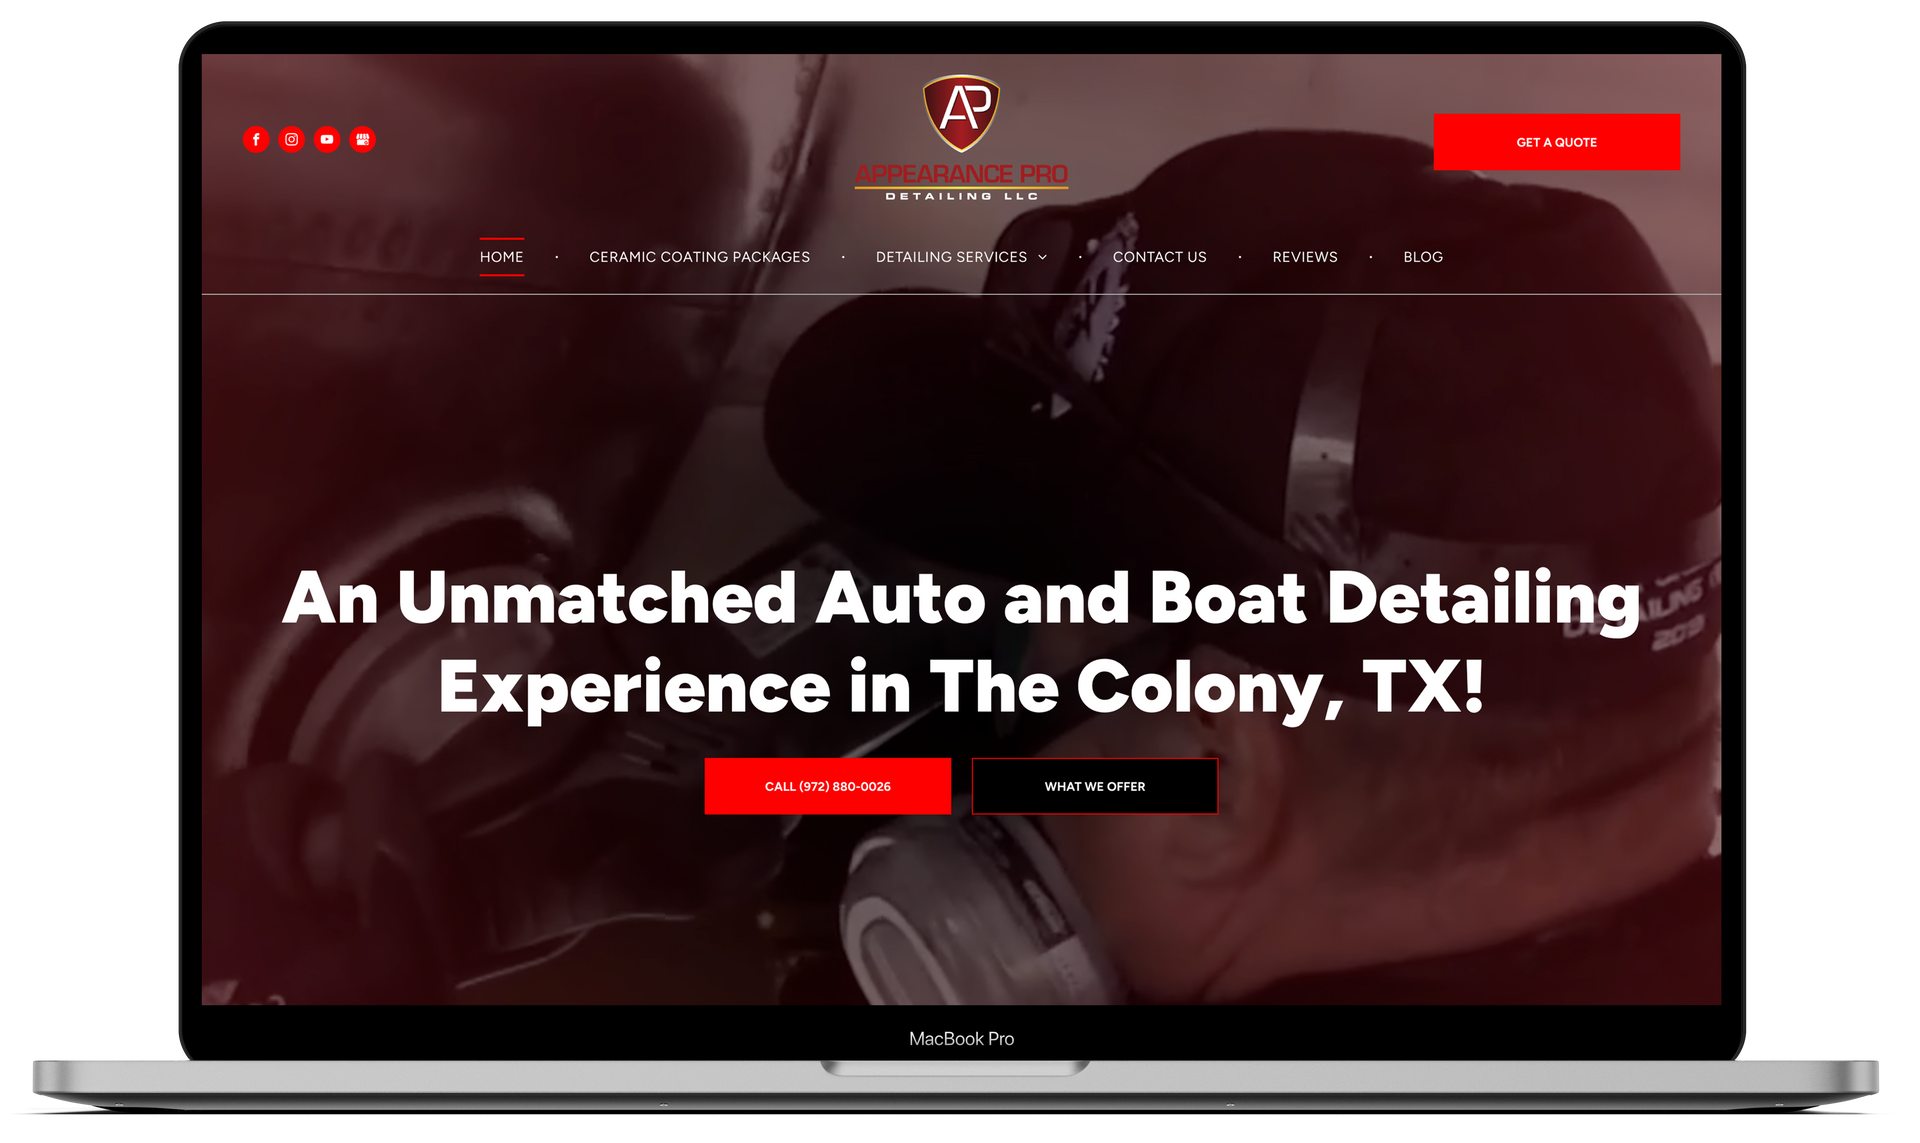 Appearance Pro Detailing | The Colony, TX